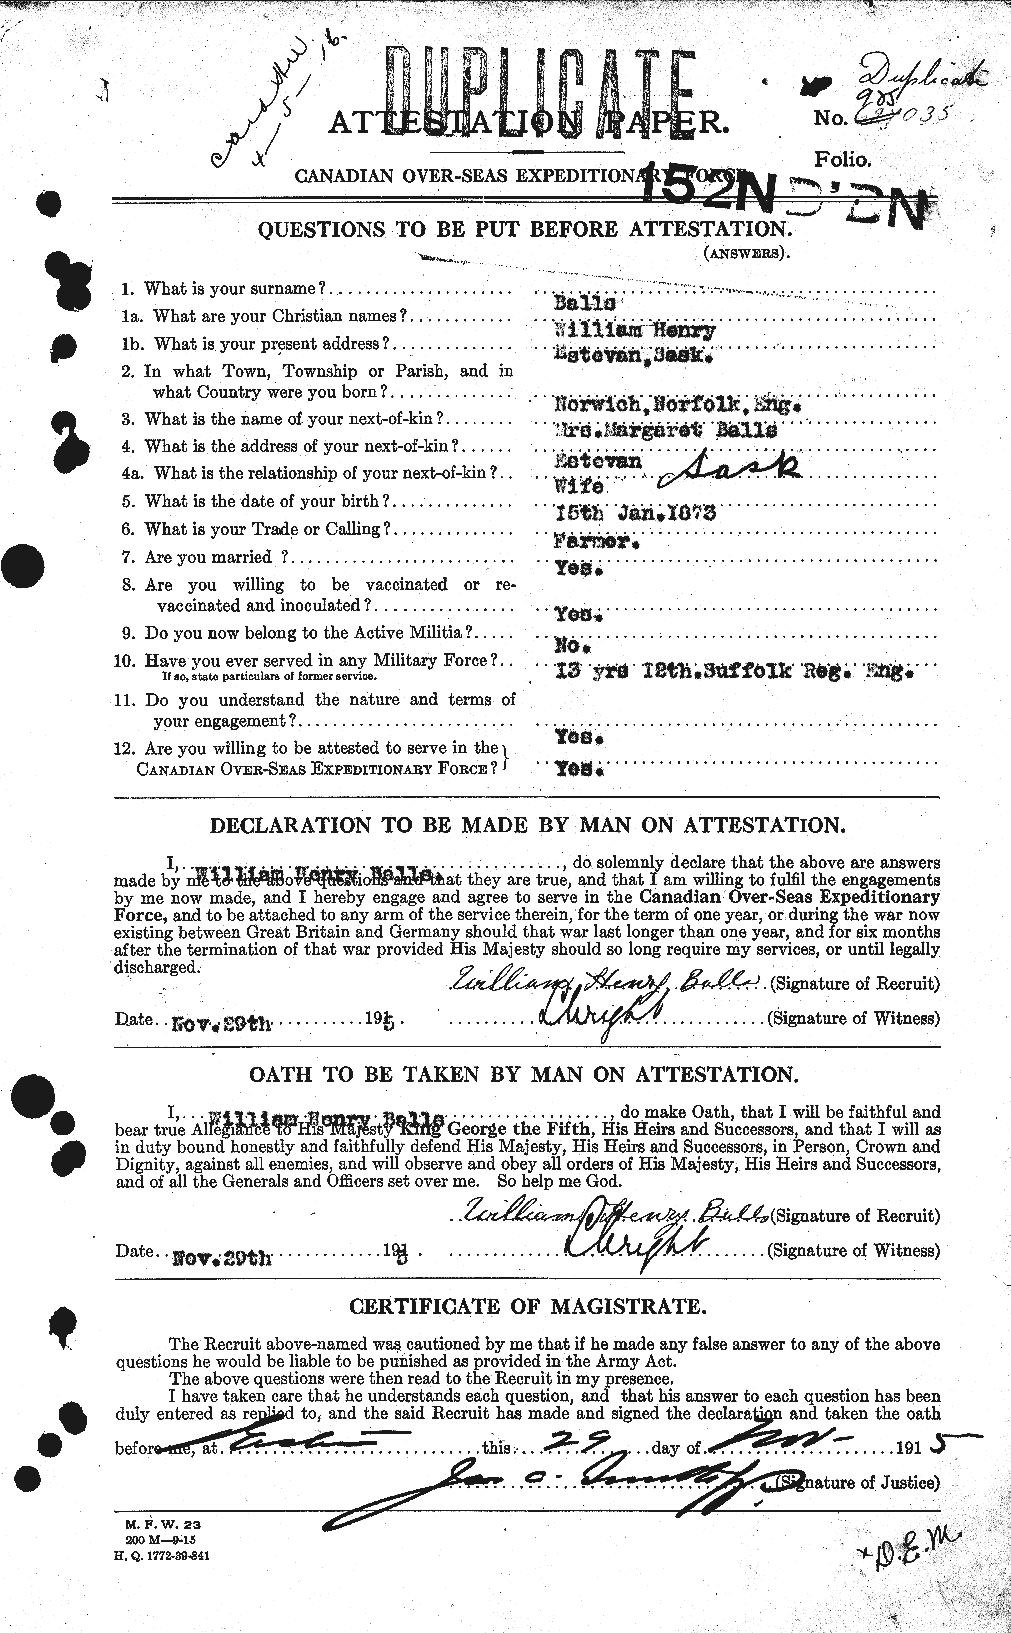 Personnel Records of the First World War - CEF 219610a